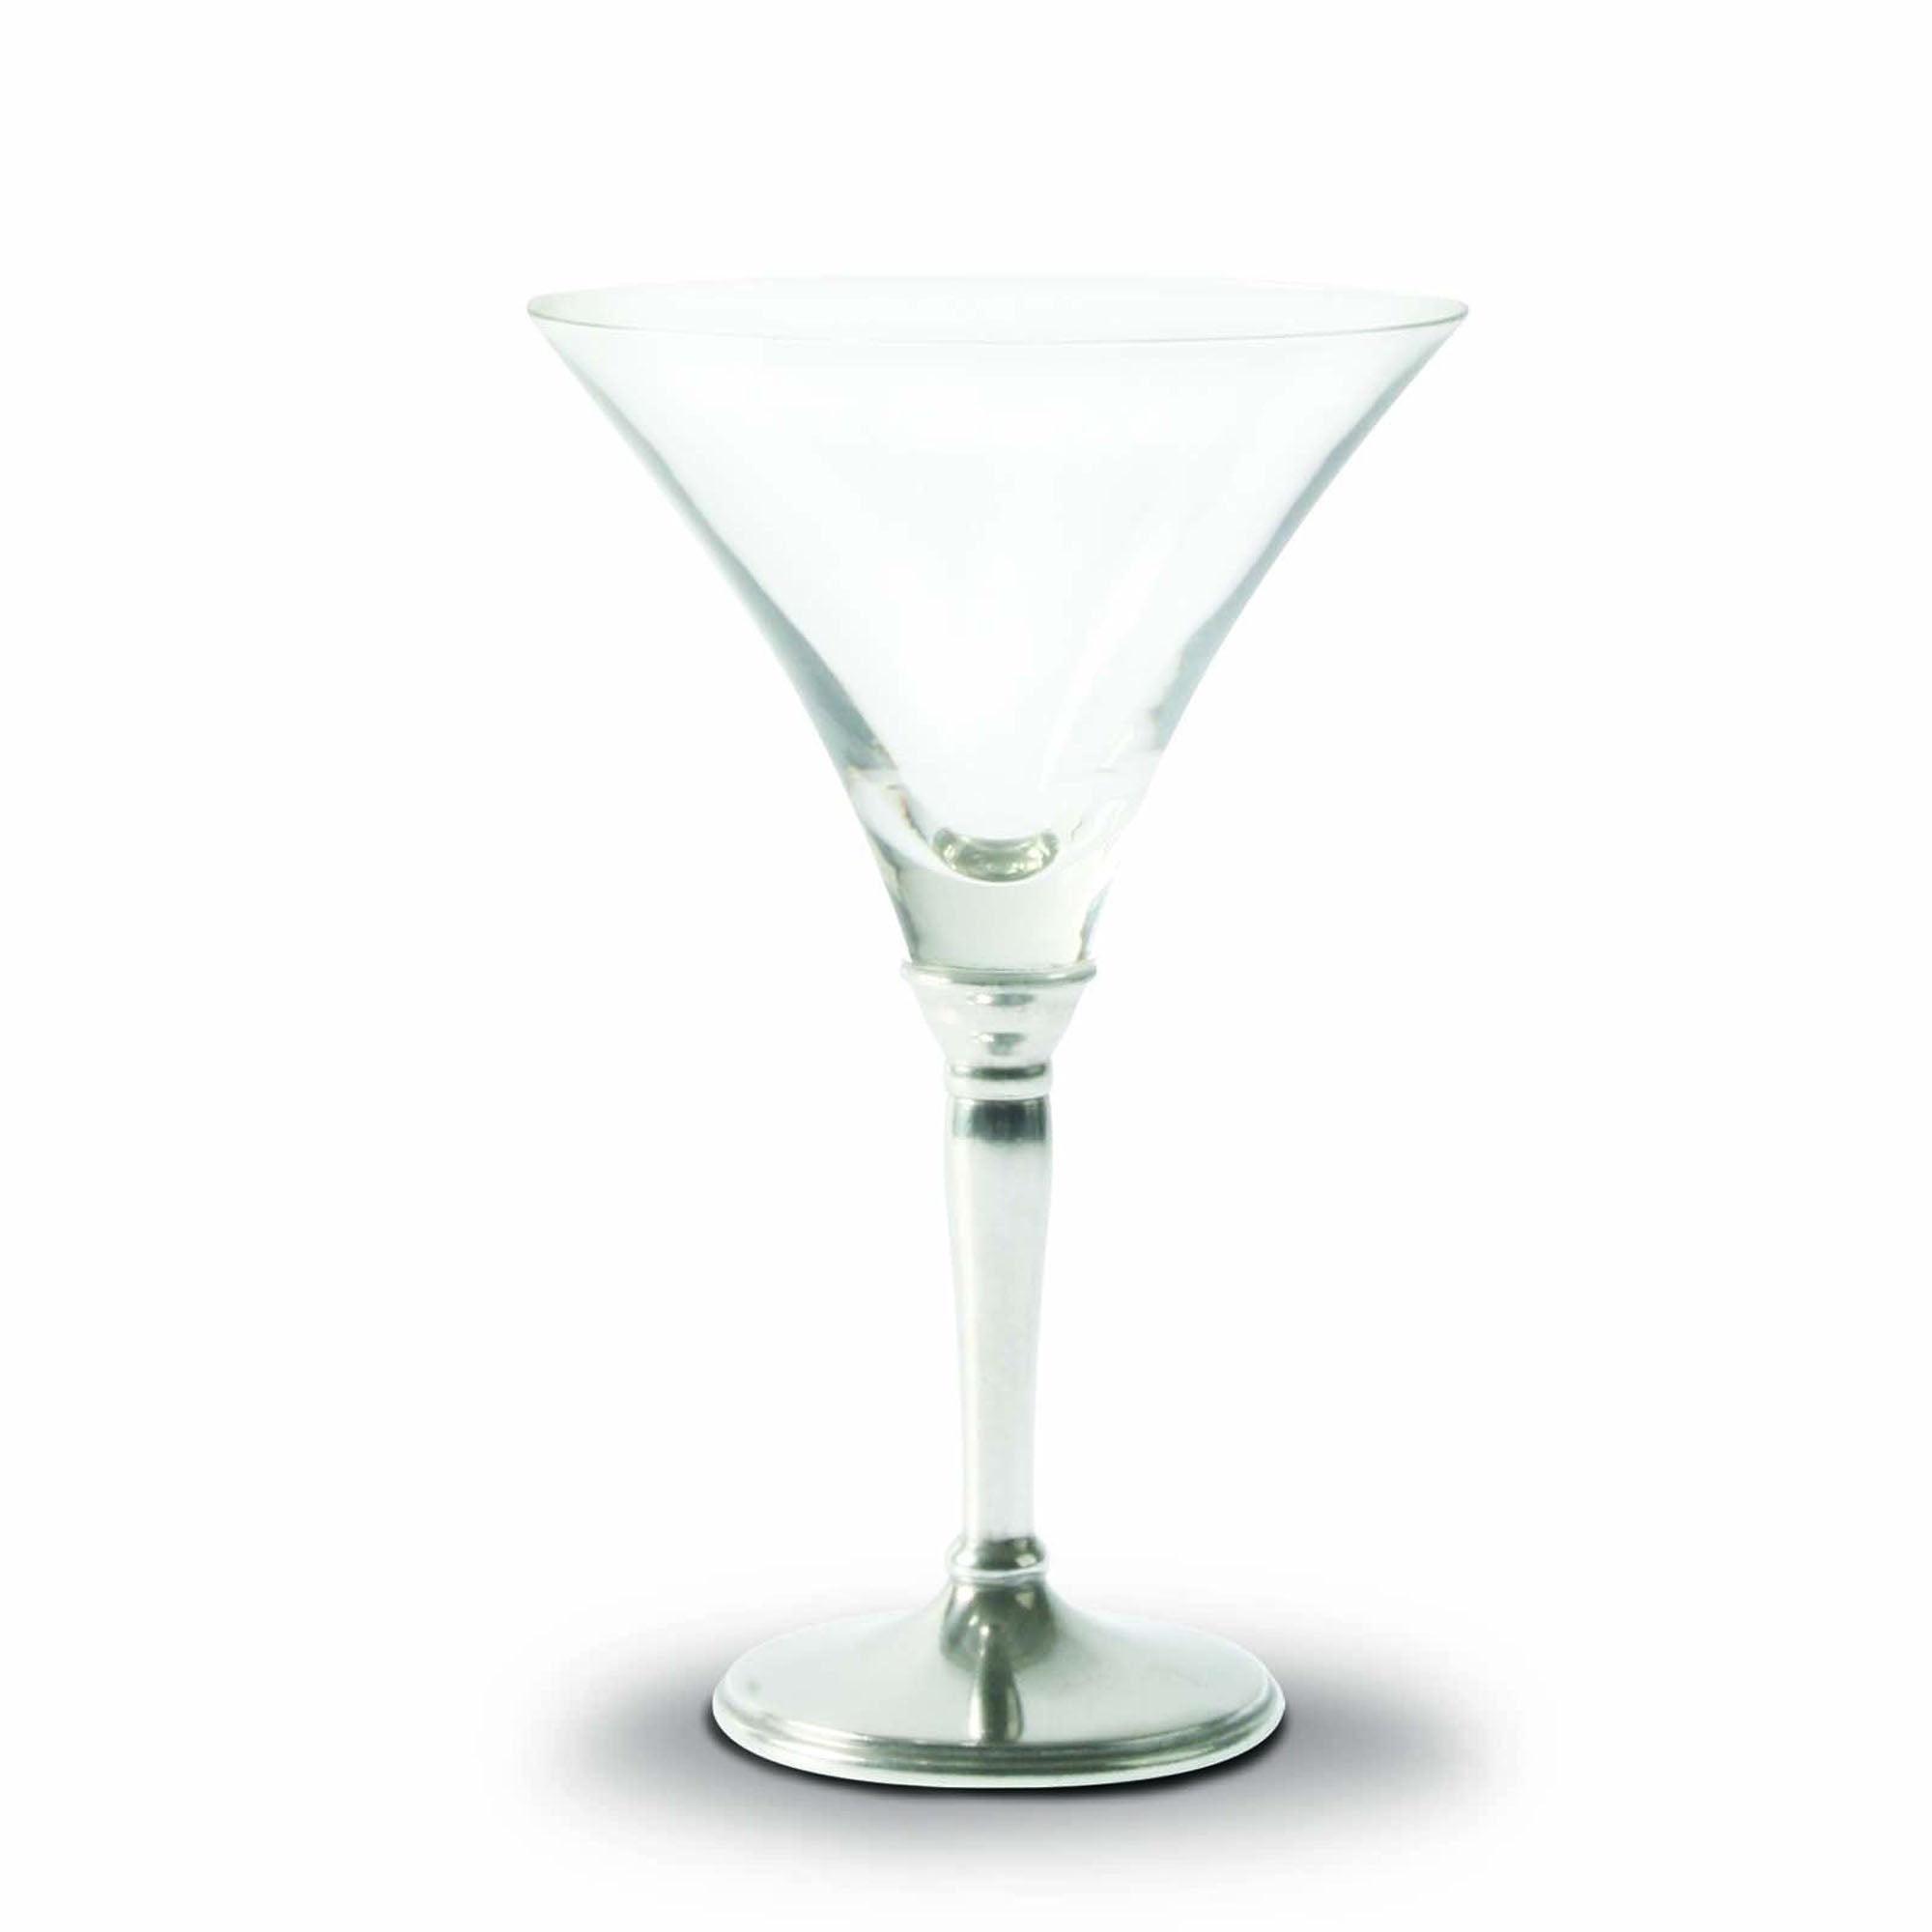 Vagabond House Classic Pewter Stem Cocktail Glass Product Image